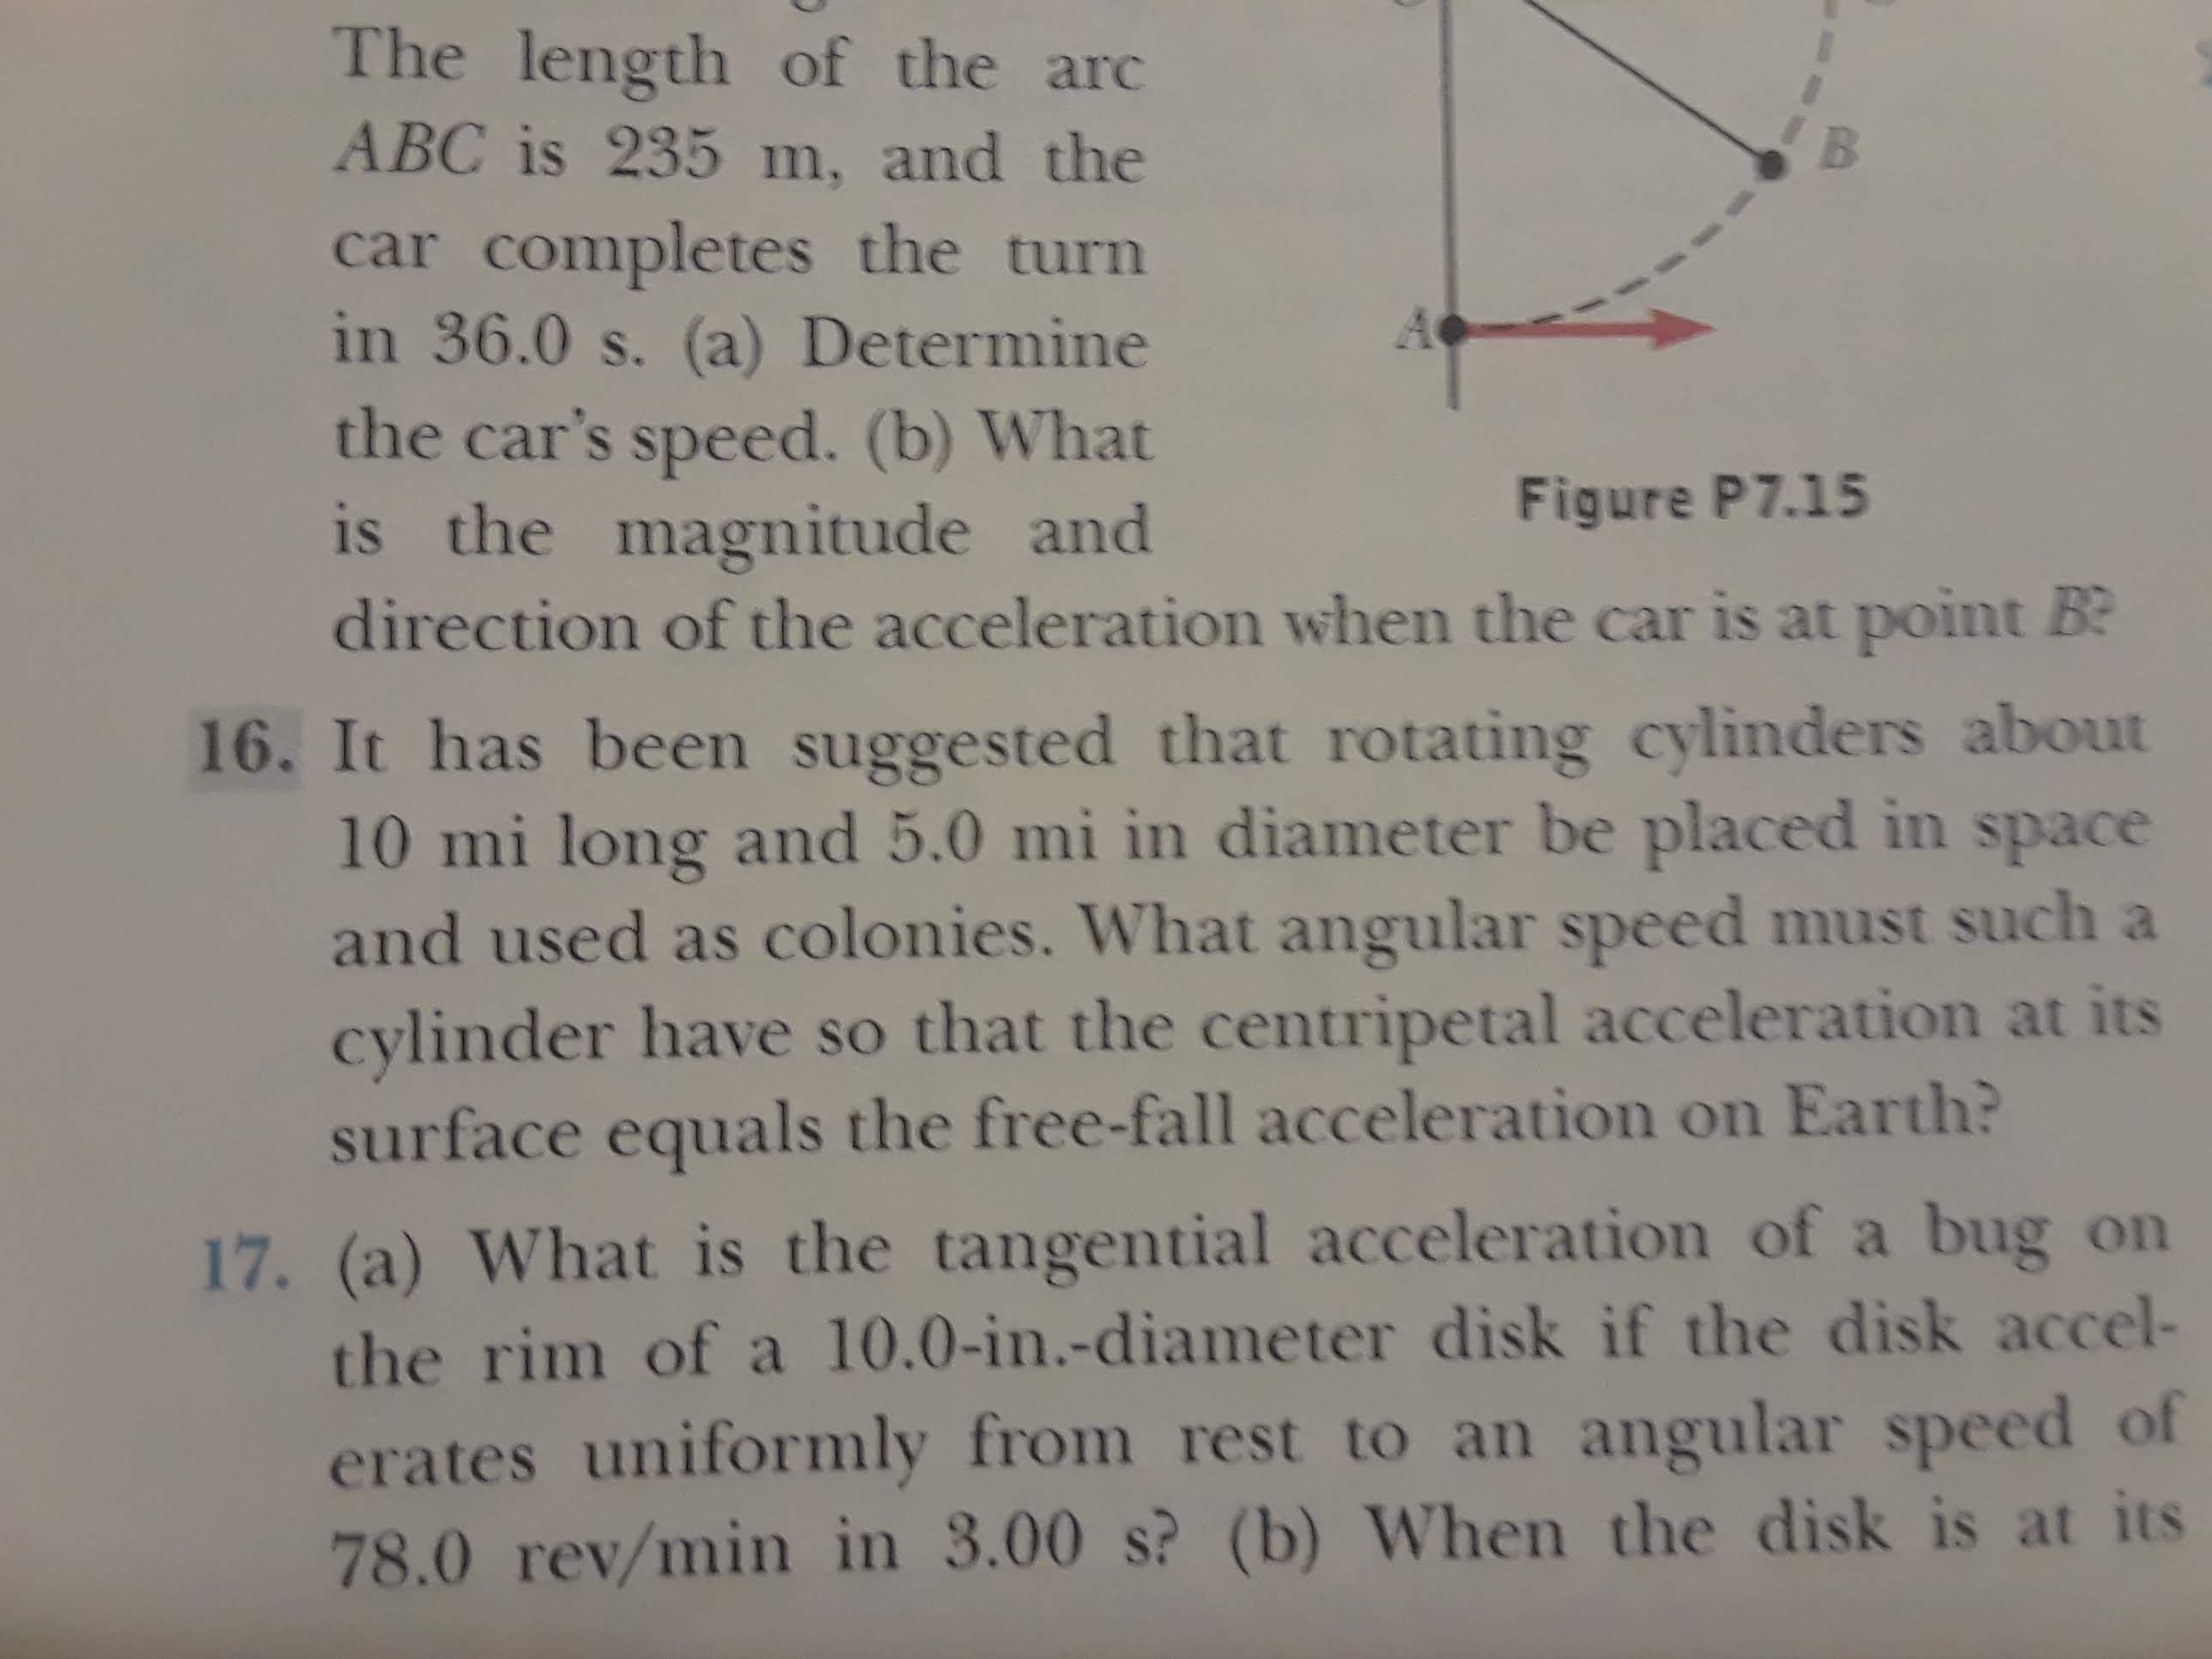 The length of the arc
B
ABC is 235 m, and the
car completes the turn
in 36.0 s. (a) Determine
the car's speed. (b) What
is the magnitude and
direction of the acceleration when the car is at point B
Figure P7.15
16. It has been suggested that rotating cylinders about
10 mi long and 5.0 mi in diameter be placed in space
and used as colonies. What angular speed must such a
cylinder have so that the centripetal acceleration at its
surface equals the free-fall acceleration on Earth?
17. (a) What is the tangential acceleration of a bug on
the rim of a 10.0-in.-diameter disk if the disk accel-
erates uniformly from rest to an angular speed of
78.0 rev/min in 3.00 s? (b) When the disk is at its
